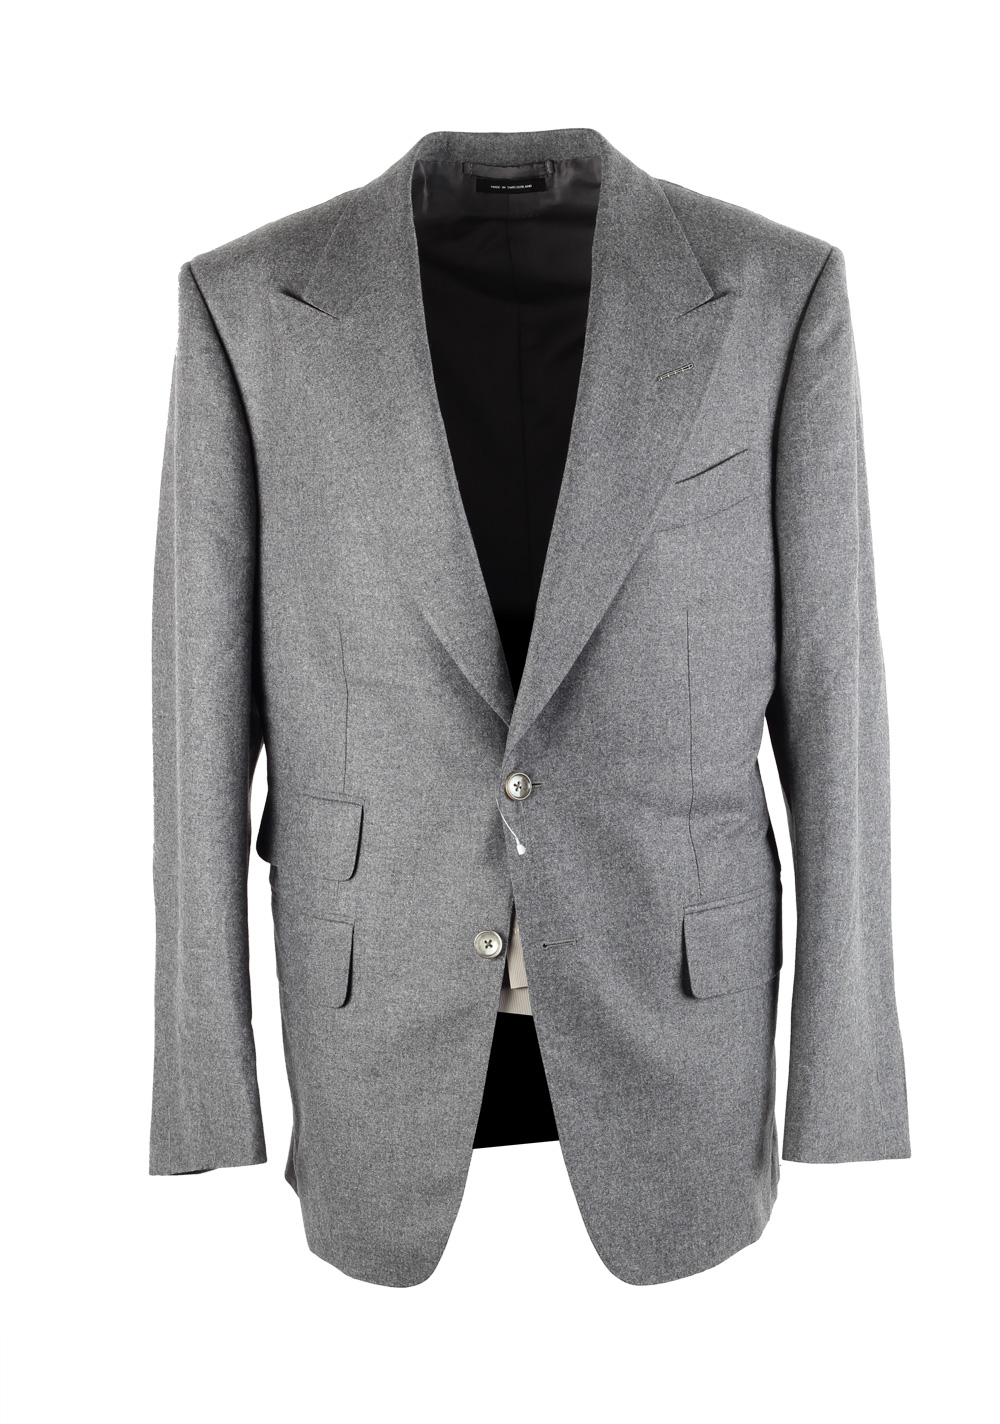 TOM FORD Windsor Solid Gray Suit Size 50 / 40R U.S. Wool Fit A ...